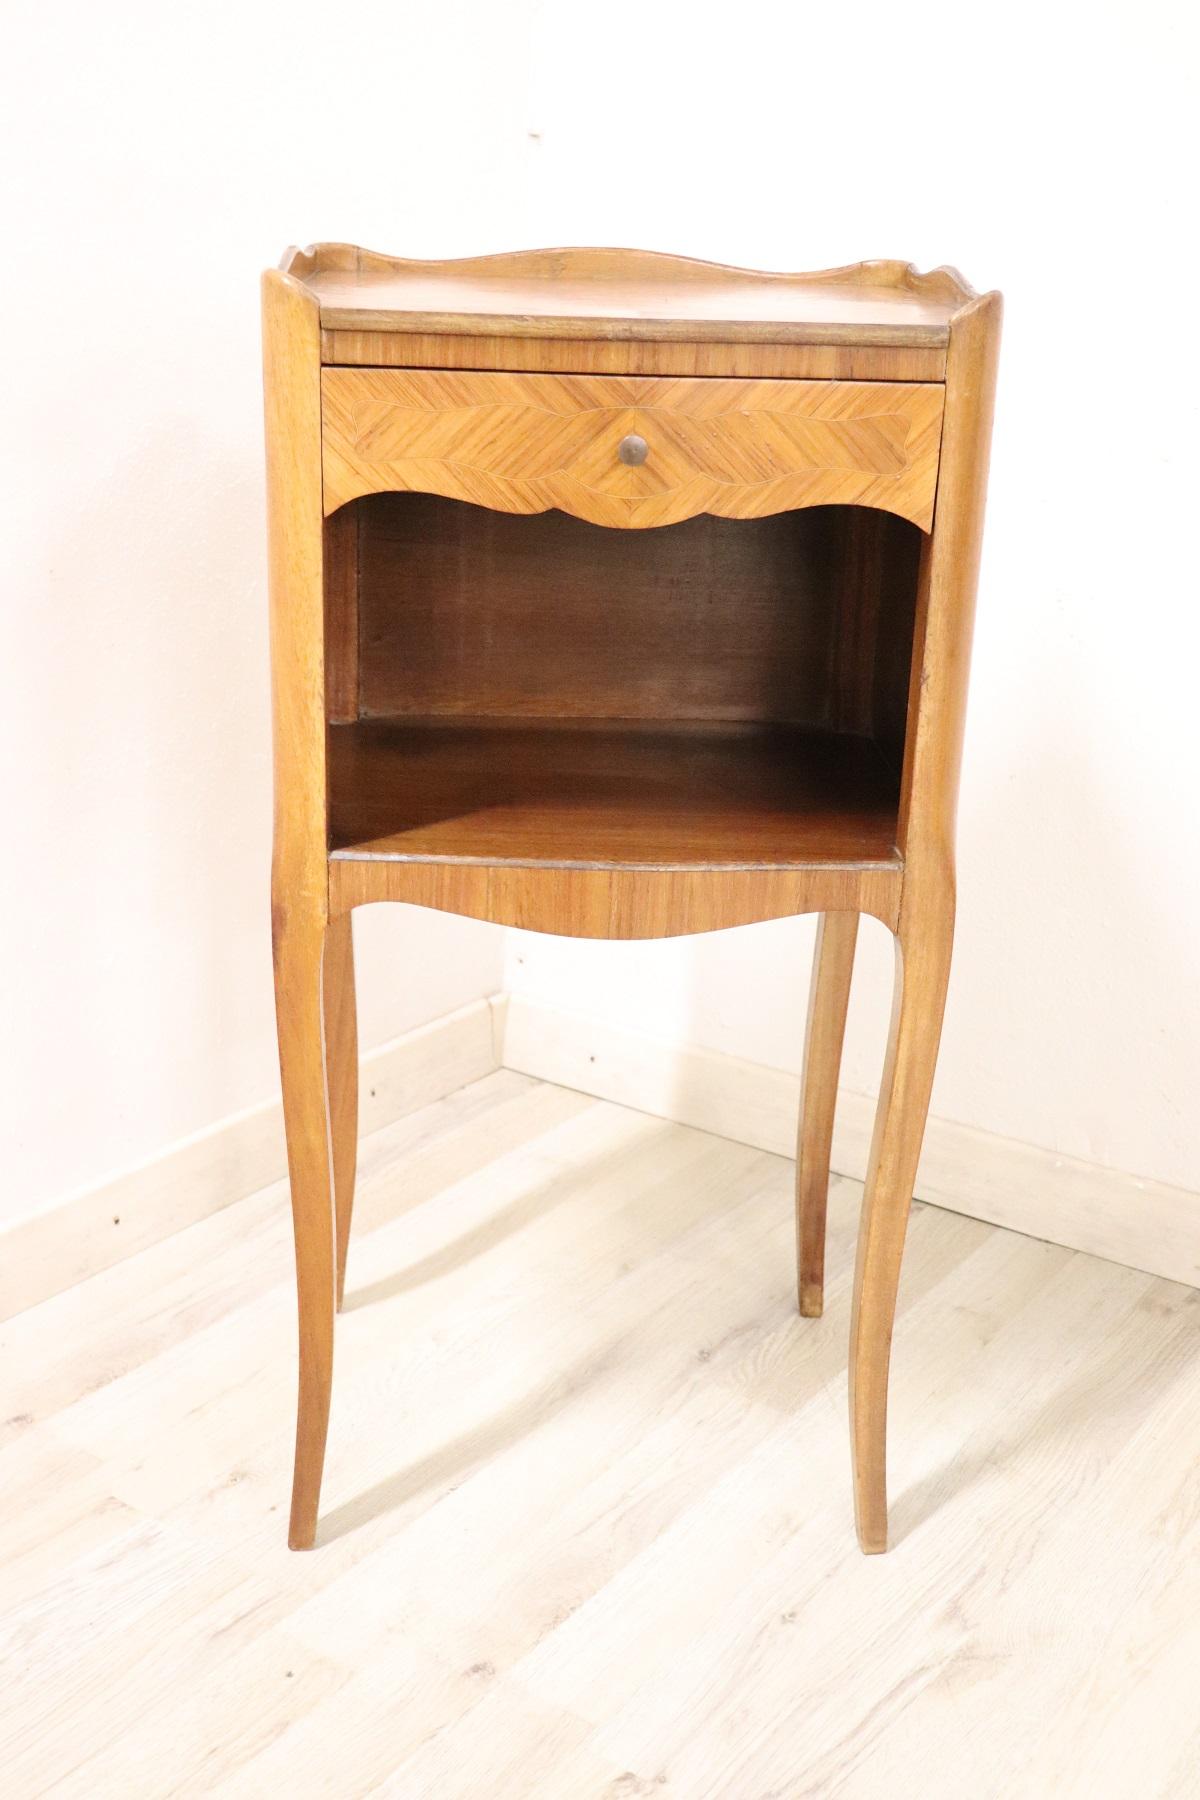 Rare and fine quality Italian Louis XV style 1970s side table or nightstand in inlay wood with the particular bean shape, the legs are long and slender. The decoration is on each side so you can place the tables also in the centre of the room. Made